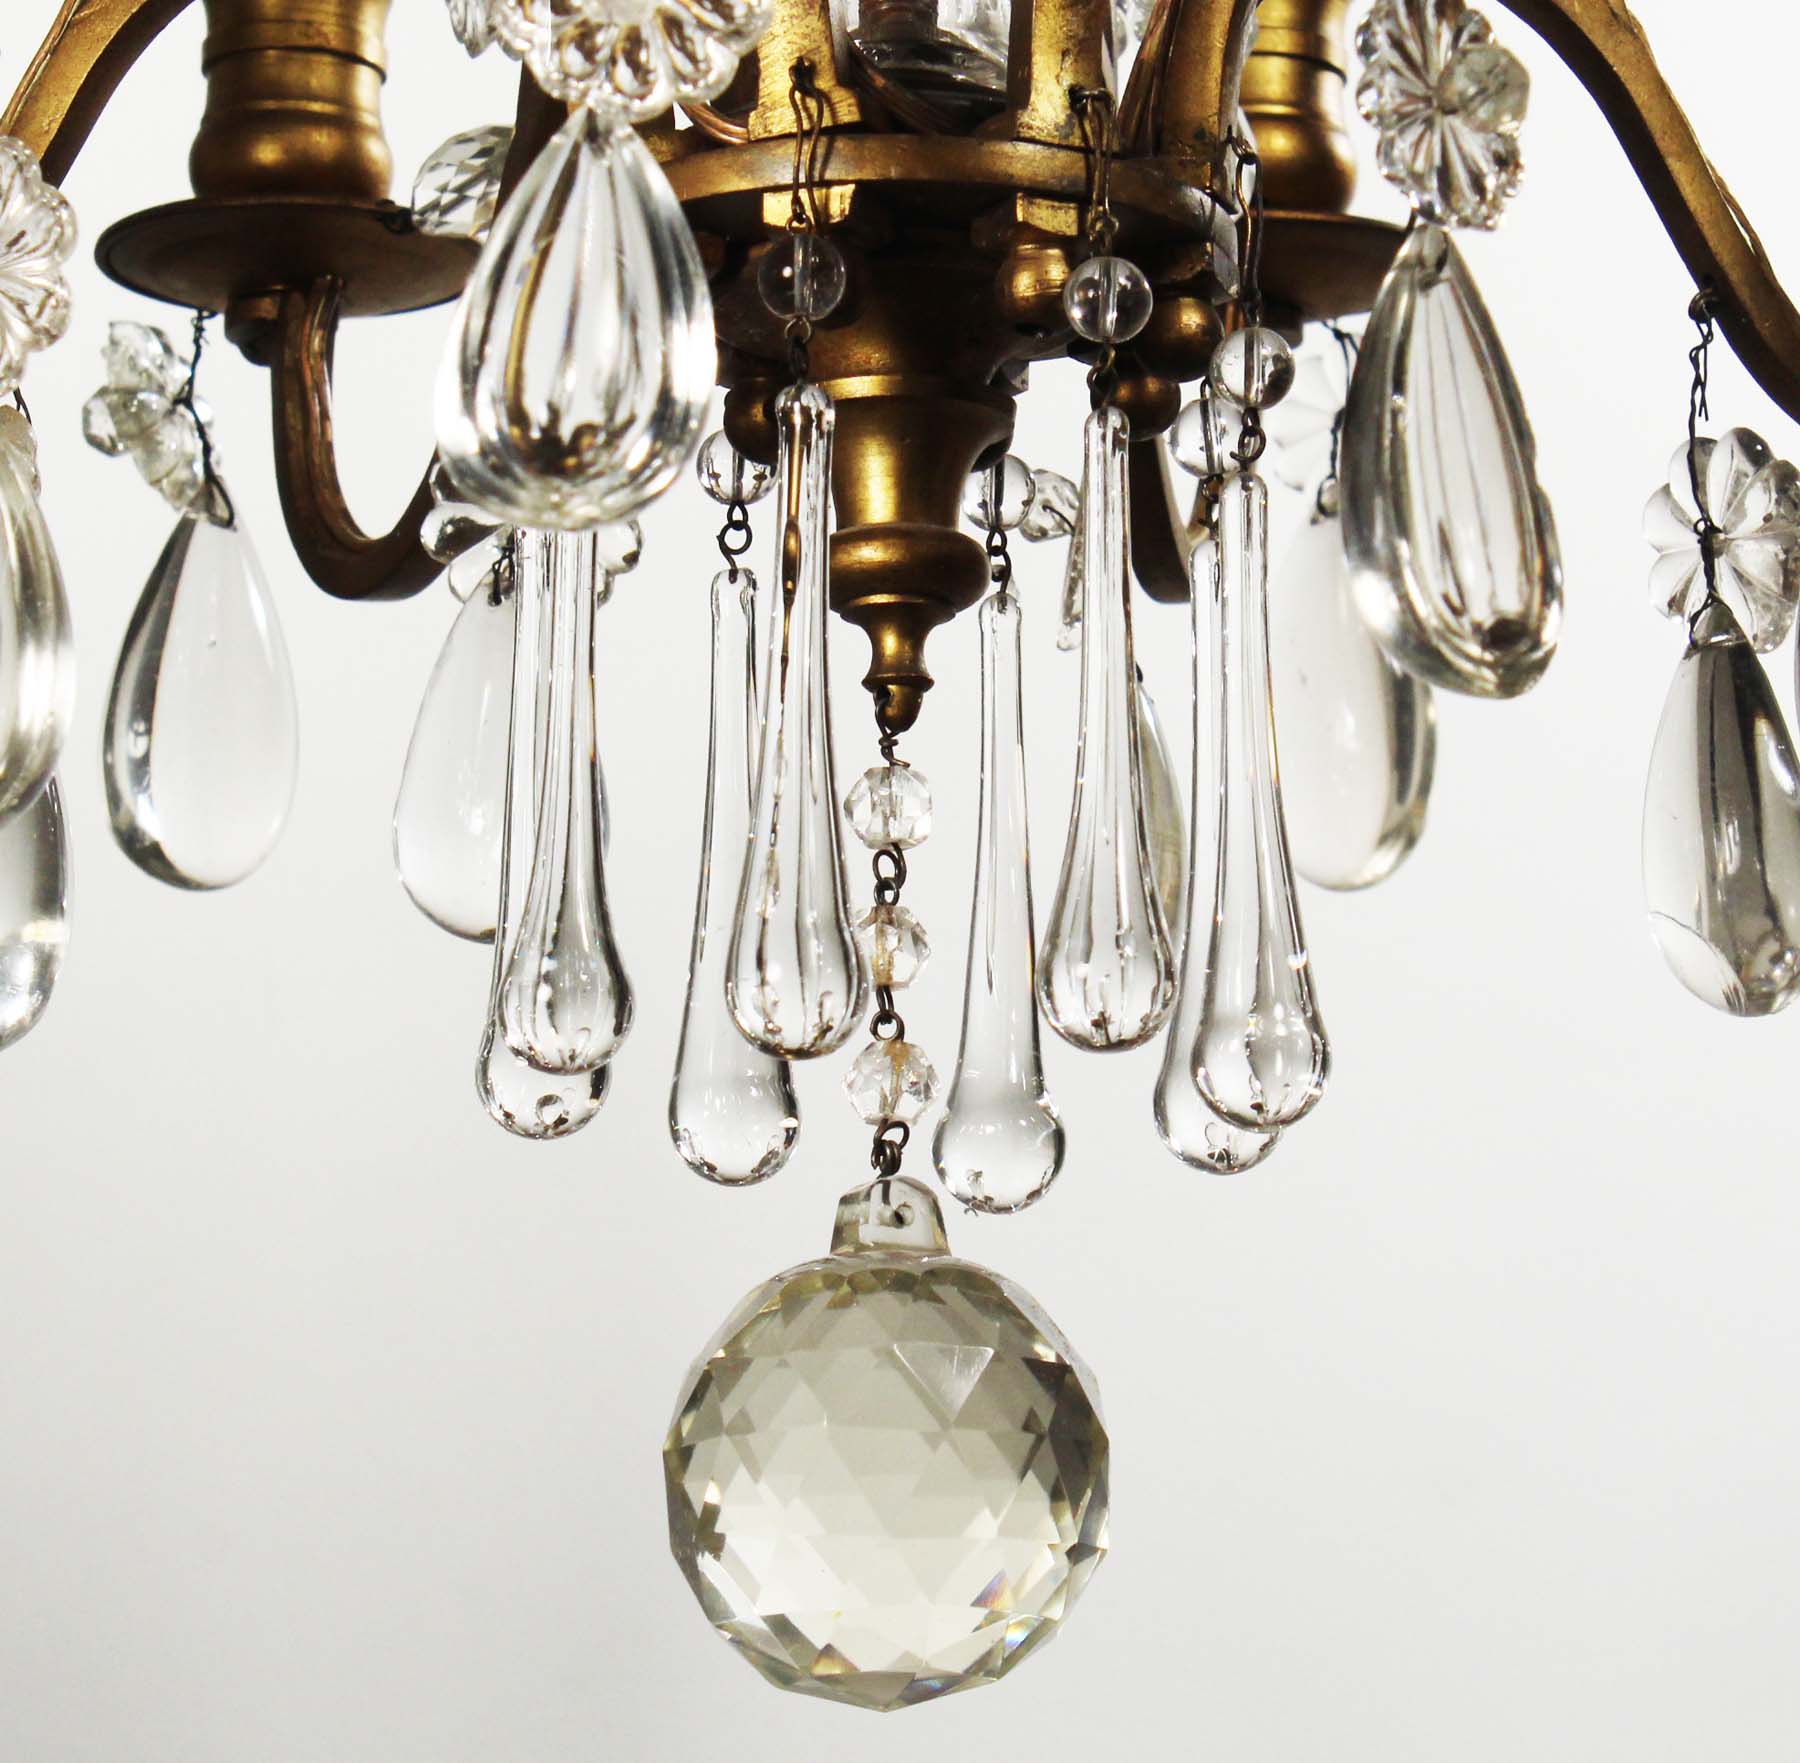 Antique Neoclassical Brass Chandelier with Prisms-68706